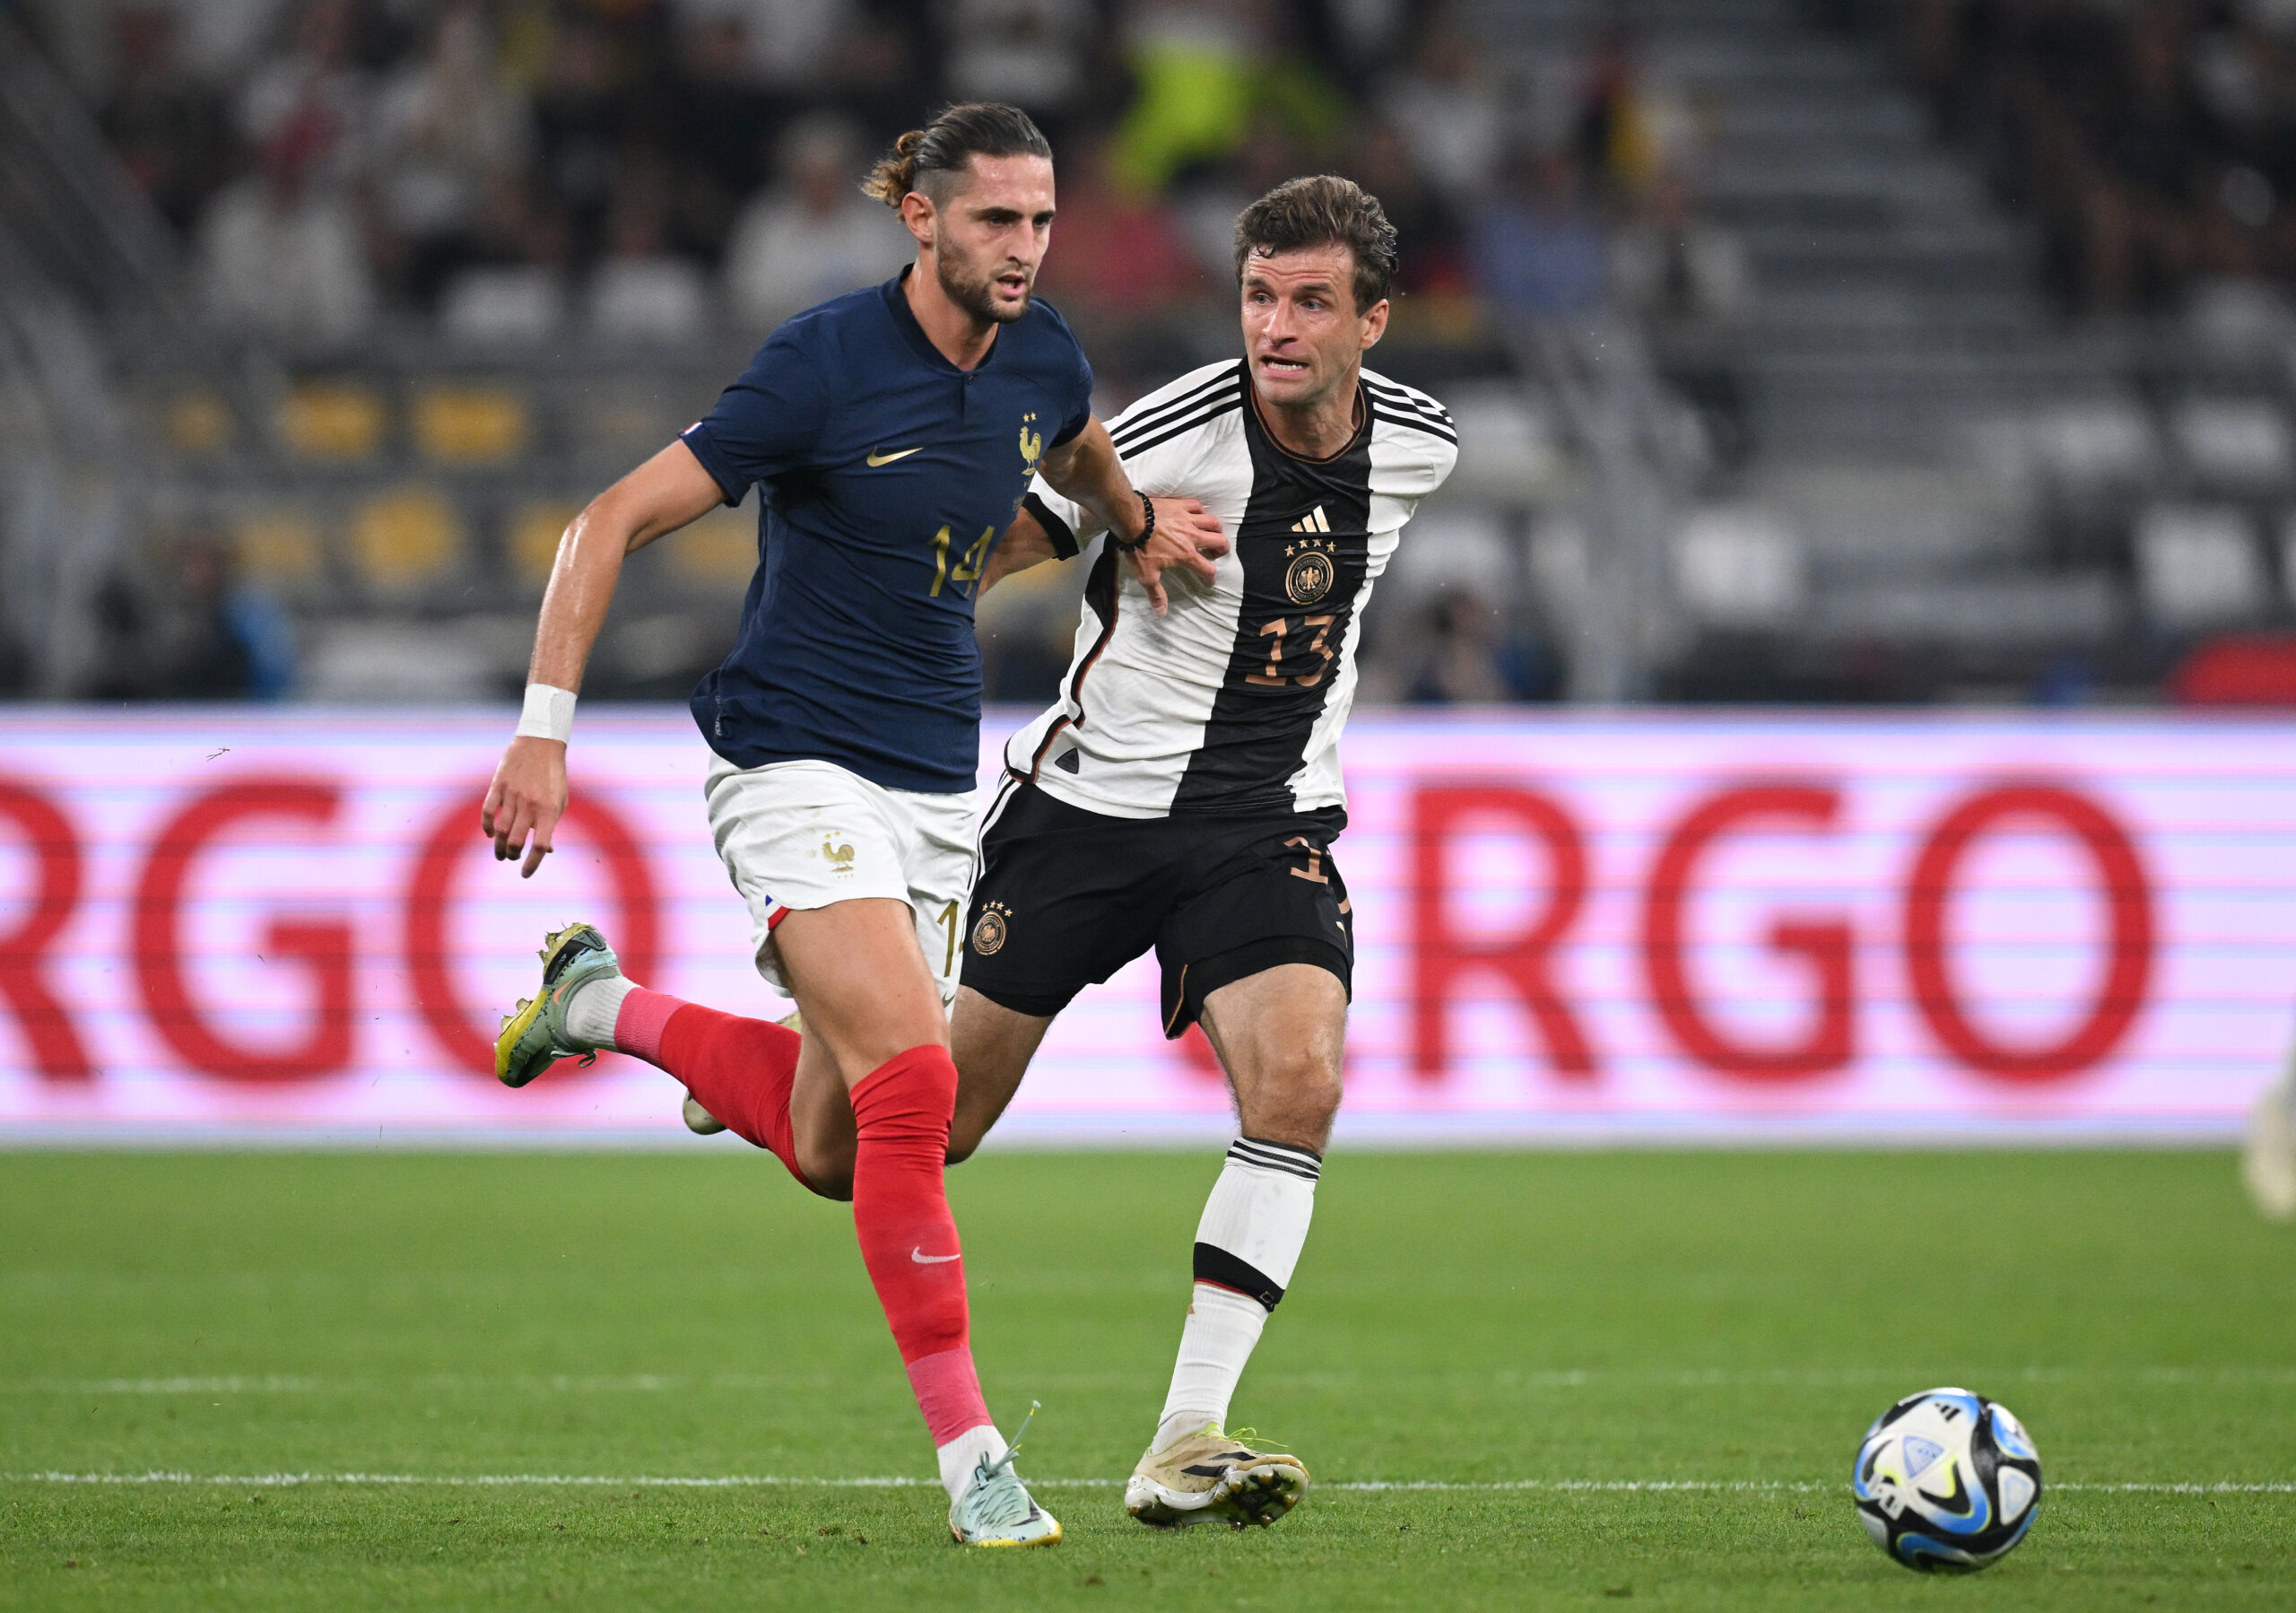 DORTMUND, GERMANY - SEPTEMBER 12: Thomas Müller of Germany is challenged by Adrien Rabiot of France during the international friendly match between Germany and France at Signal Iduna Park on September 12, 2023 in Dortmund, Germany.